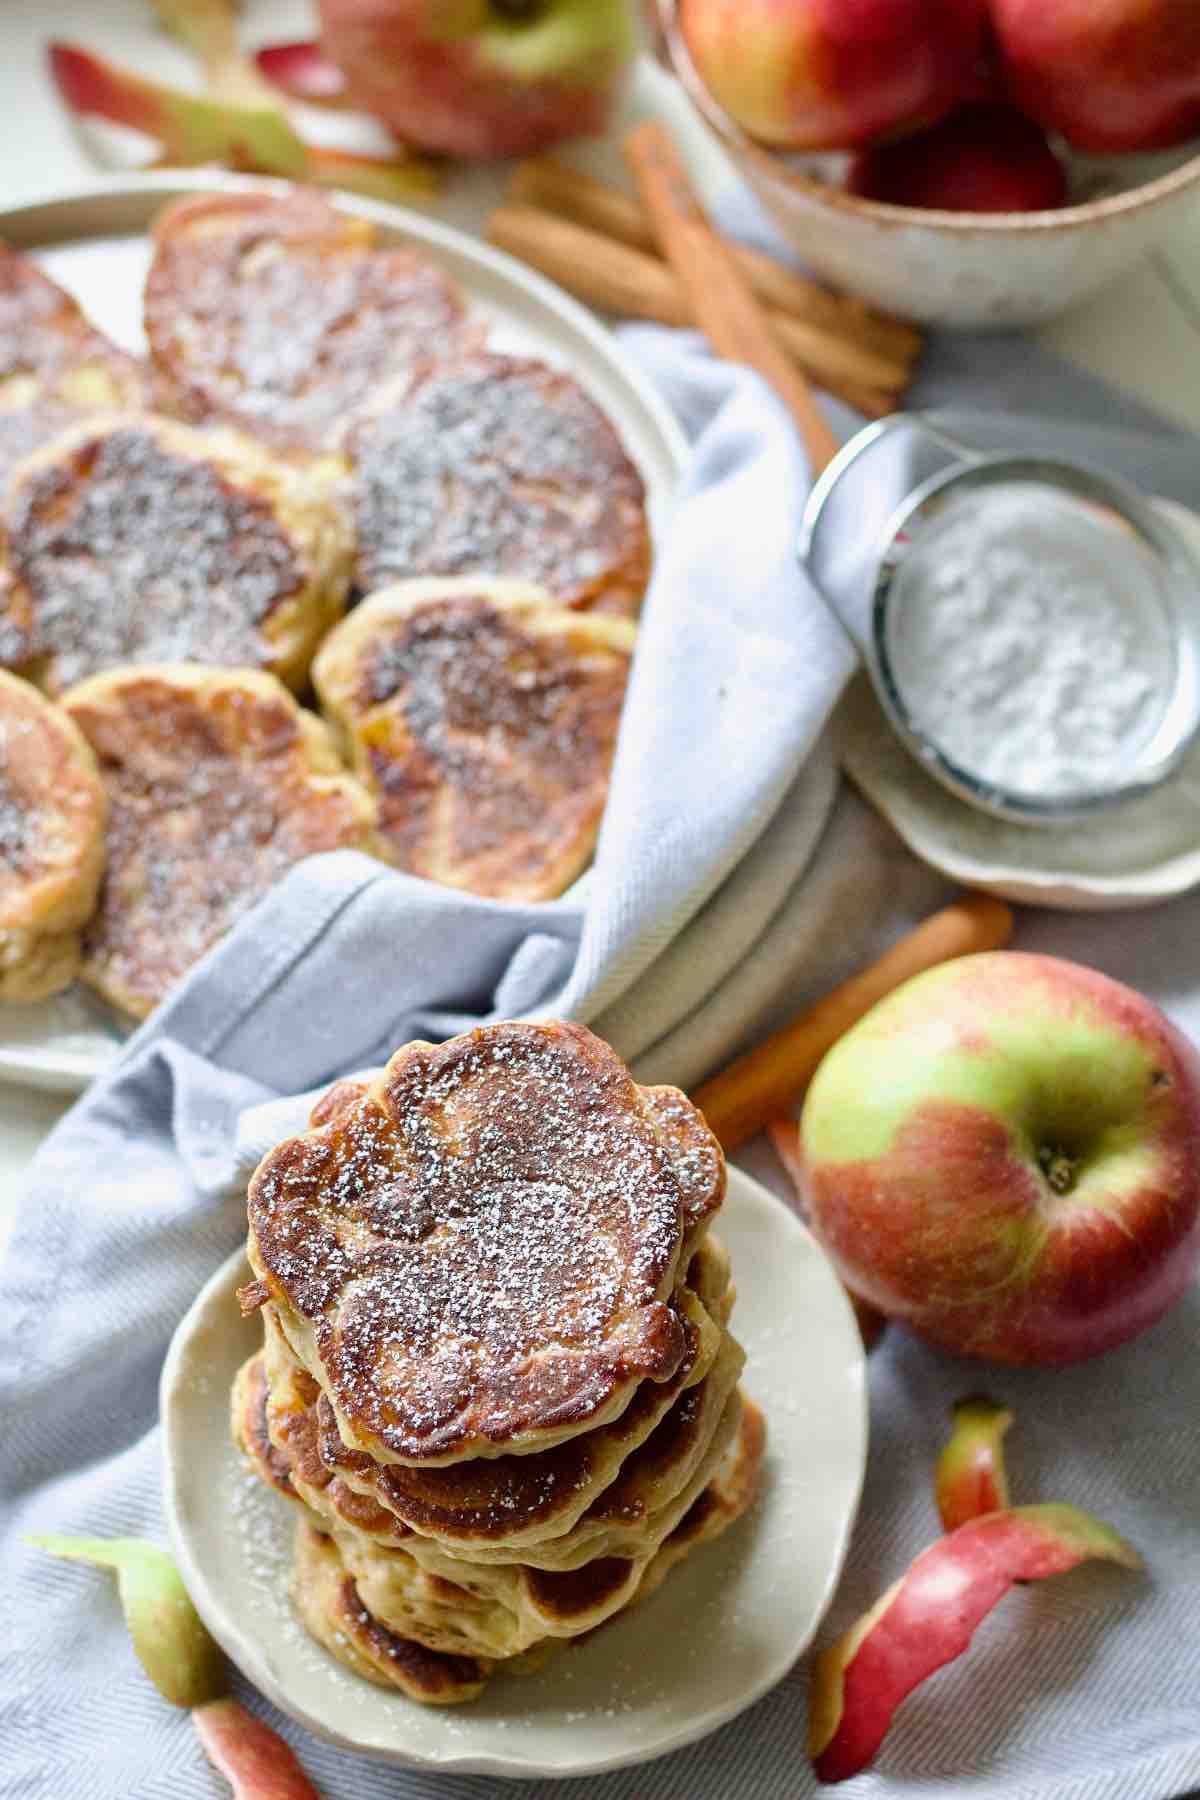 Stack of pancakes, an apple, sieve with icing sugar and plate with pancakes.